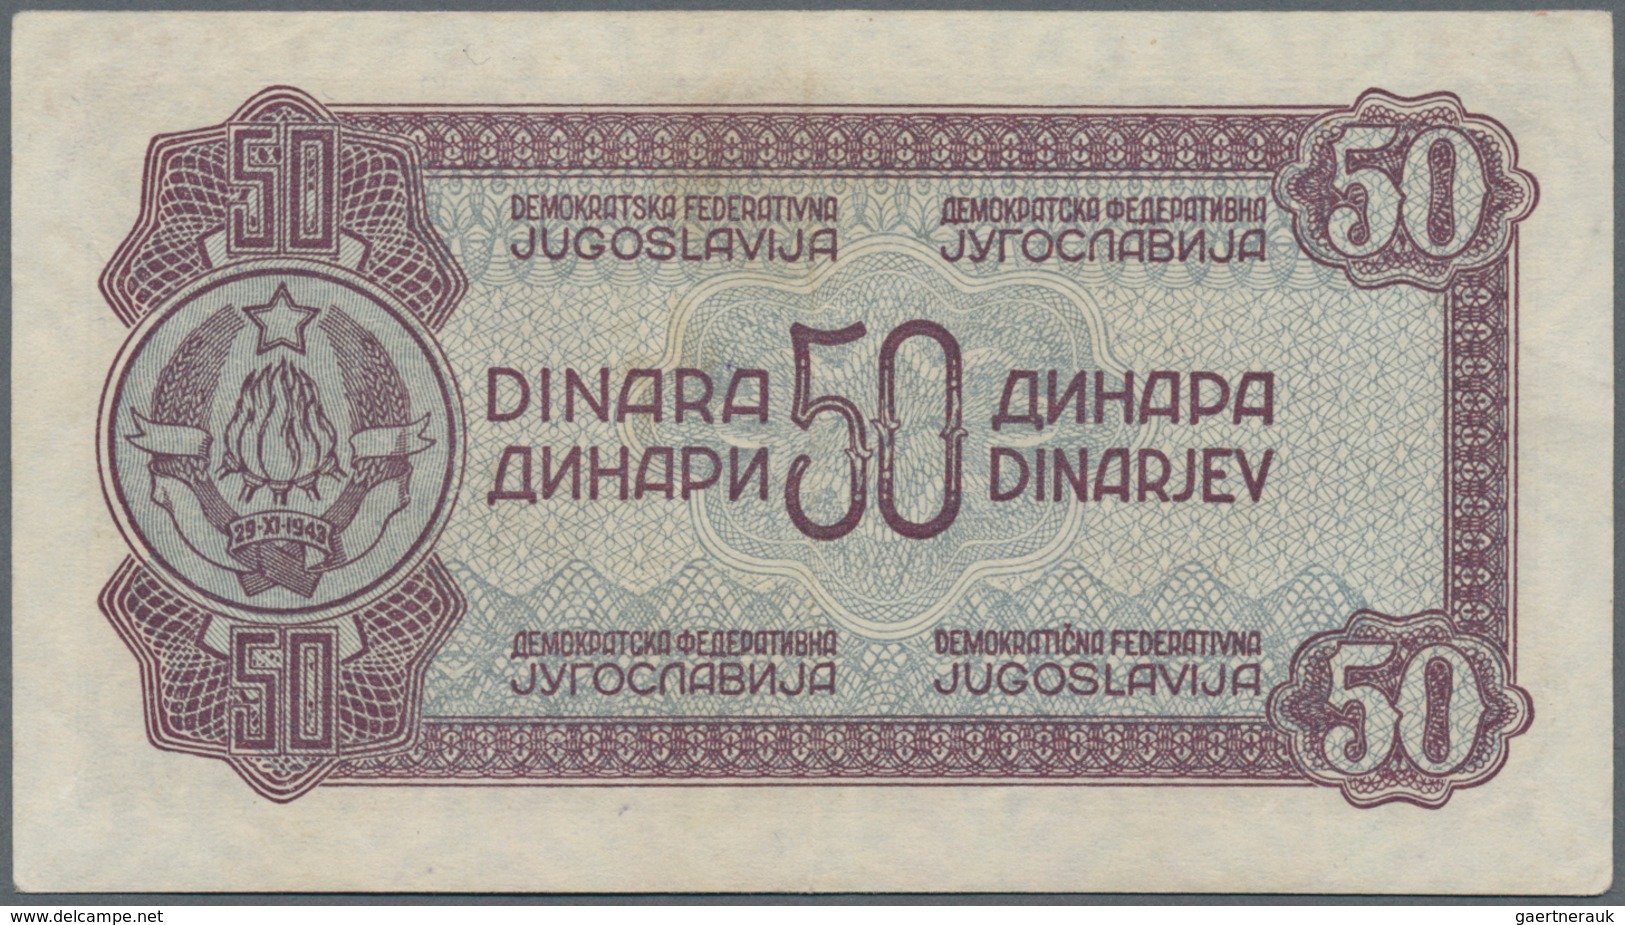 Yugoslavia / Jugoslavien: Nice set with 8 Banknotes of the 1944 "Partisan" issue with 1, 5, 2 x 10,